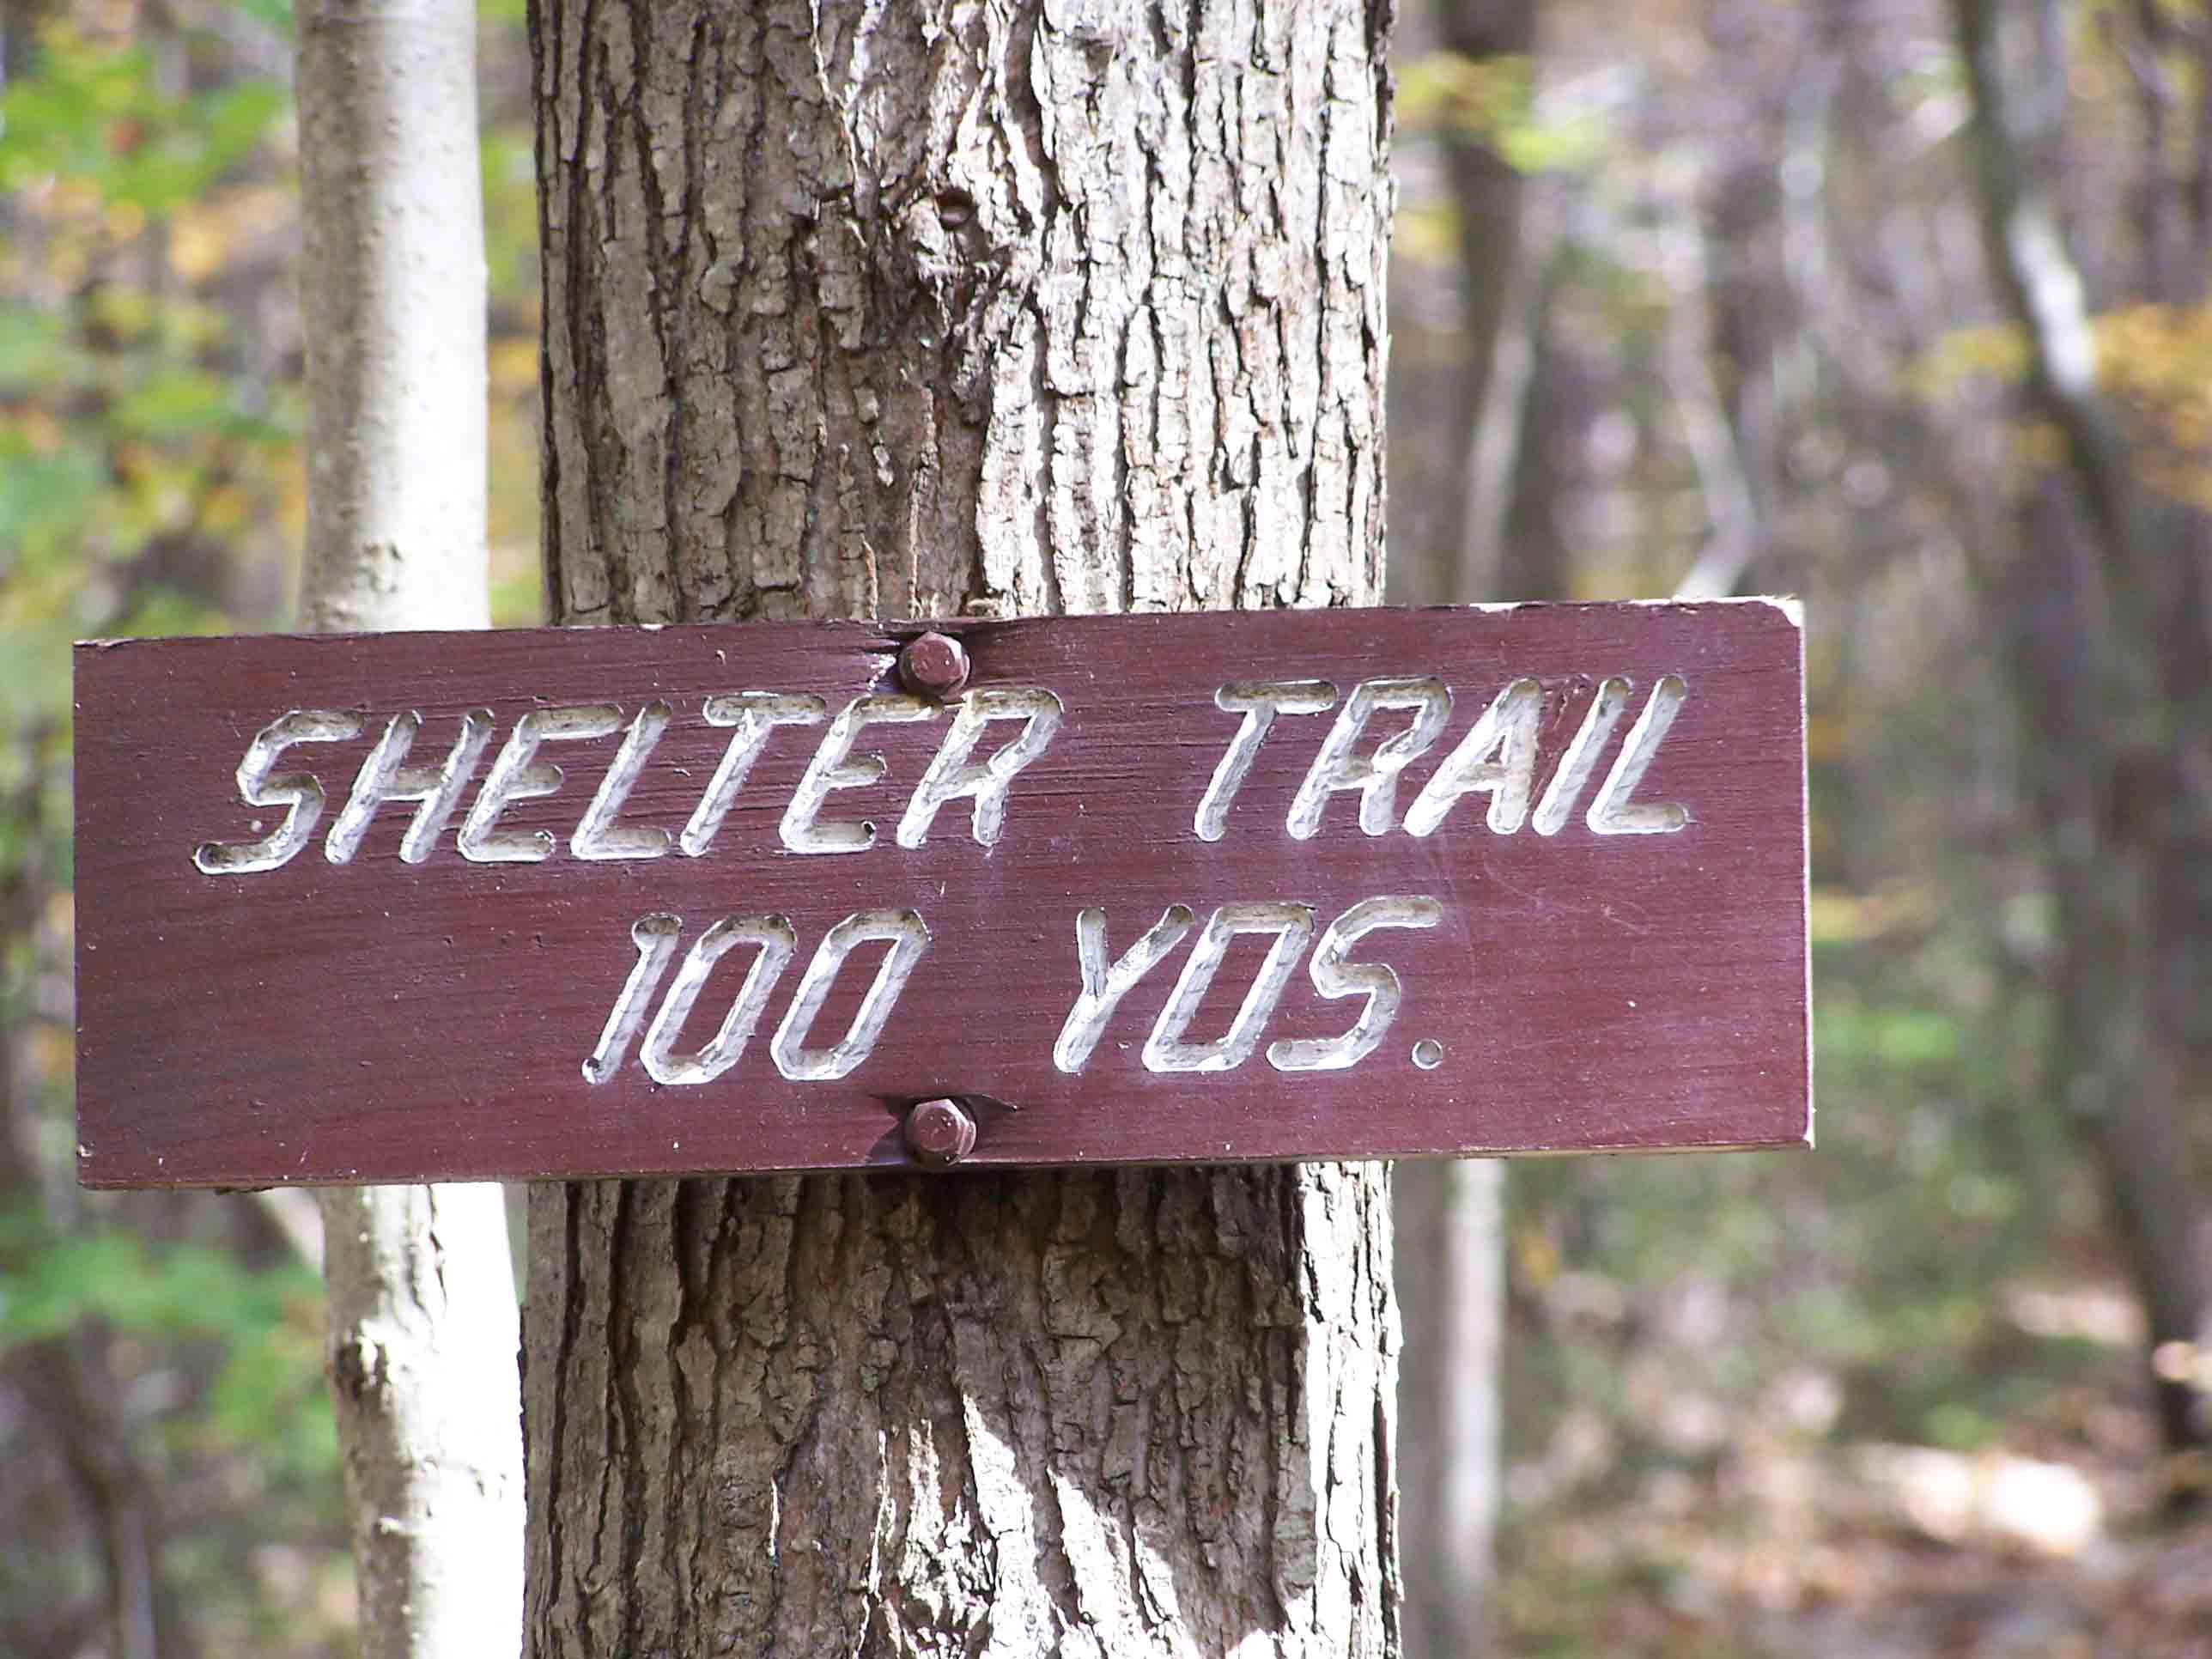 mm 3.9 - Trail to Alec Kennedy Shelter. Courtesy at@rohland.org